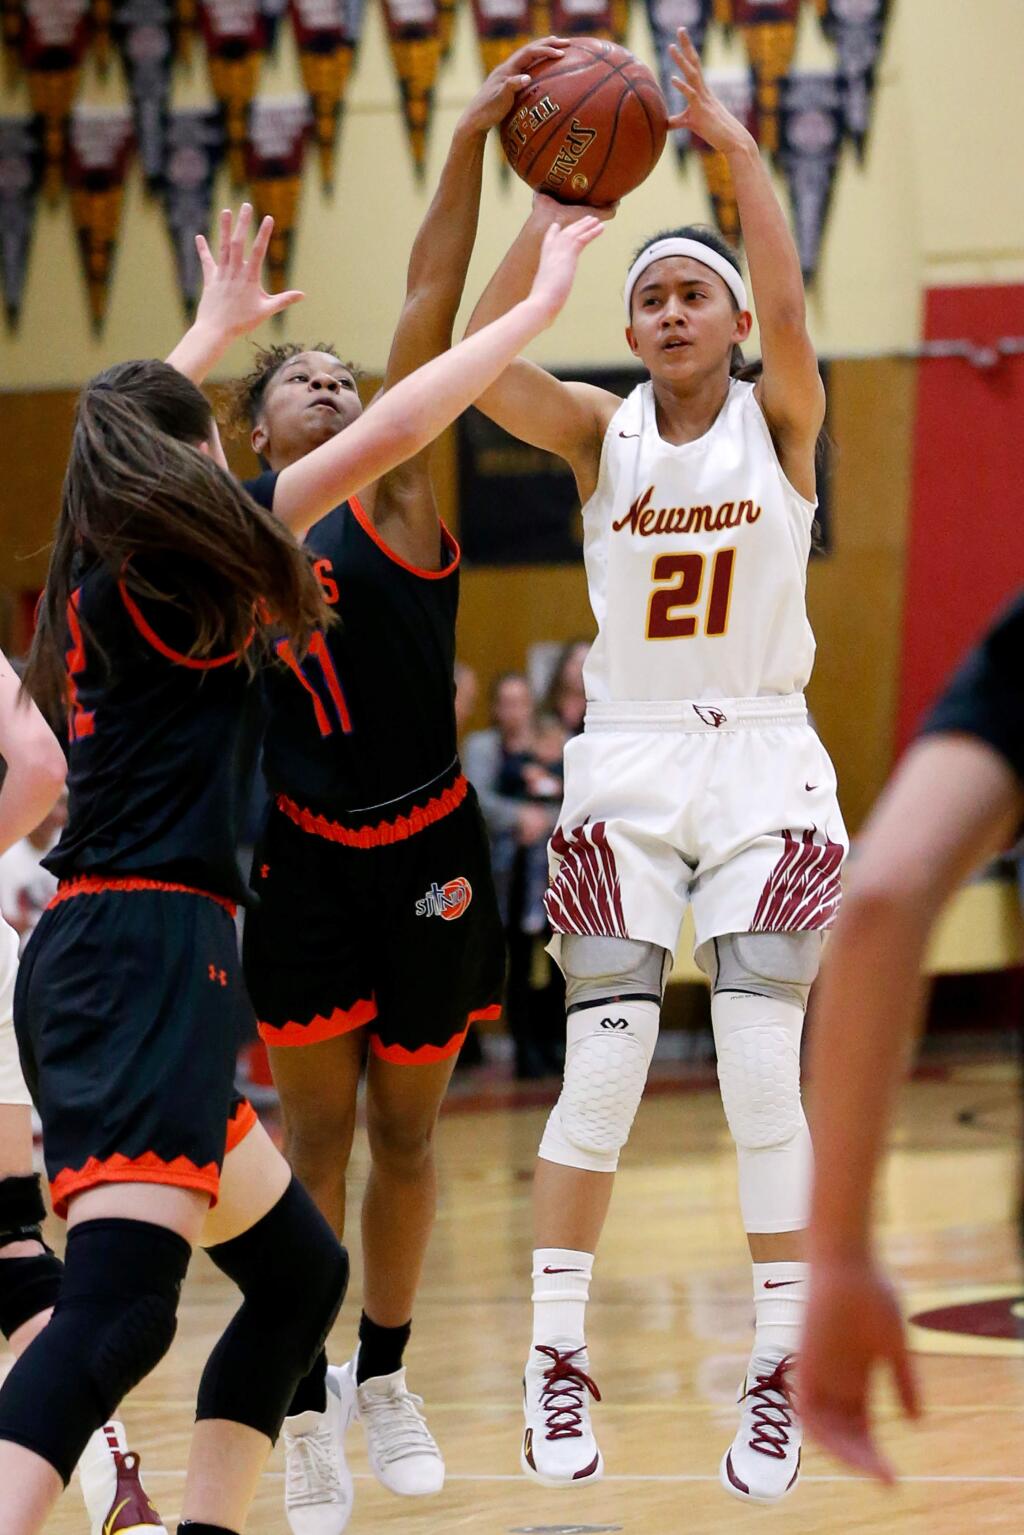 Cardinal Newman's Avery Cargill (21), right, tries to shoot from outside but gets blocked by St. Joseph Notre Dame's Zhane Duckett (11), second from left, during the first half of an NCS Division 3 girls varsity basketball playoff game between St. Joseph Notre Dame and Cardinal Newman high schools, in Santa Rosa, California, on Wednesday, February 20, 2019. (Alvin Jornada / The Press Democrat)